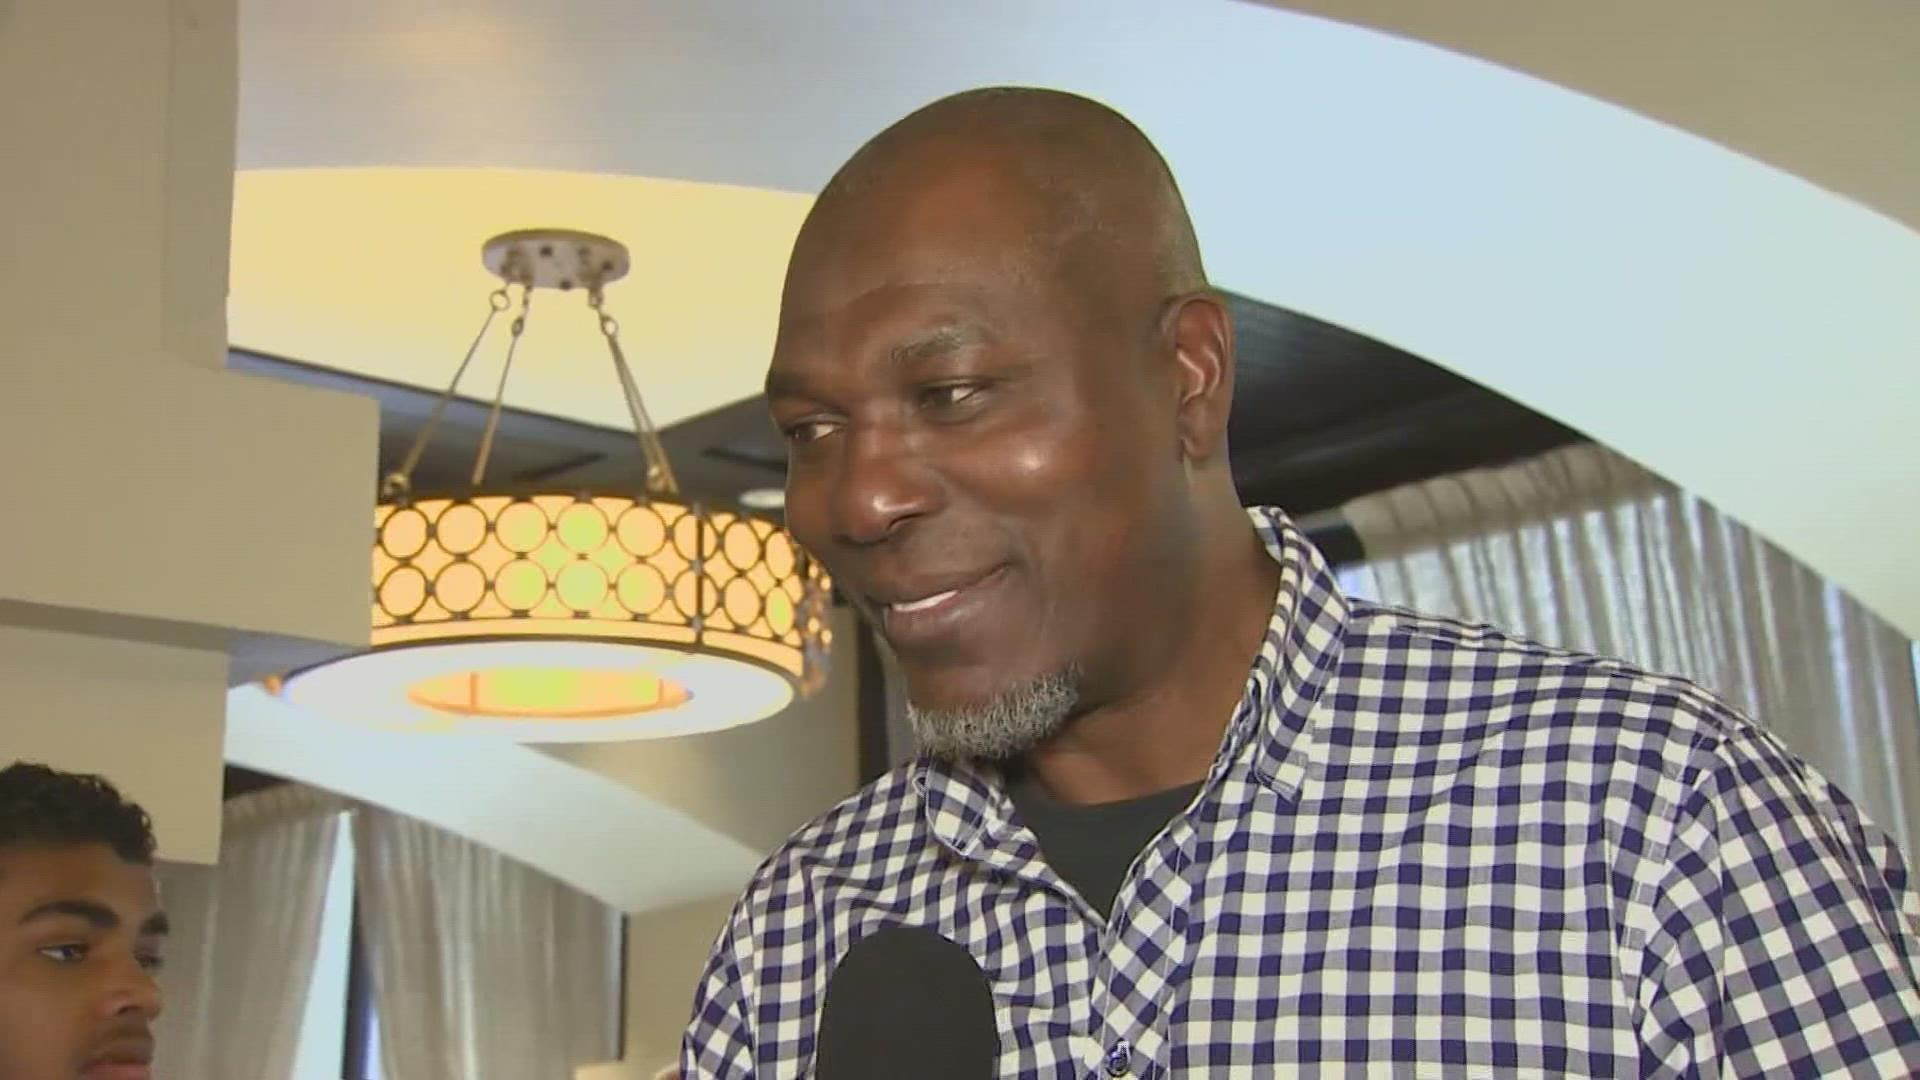 Olajuwon was part of the Cougars' legendary Phi Slama Jama team back in the 80s, and he feels good about the 2022 team's chances in the Sweet 16.